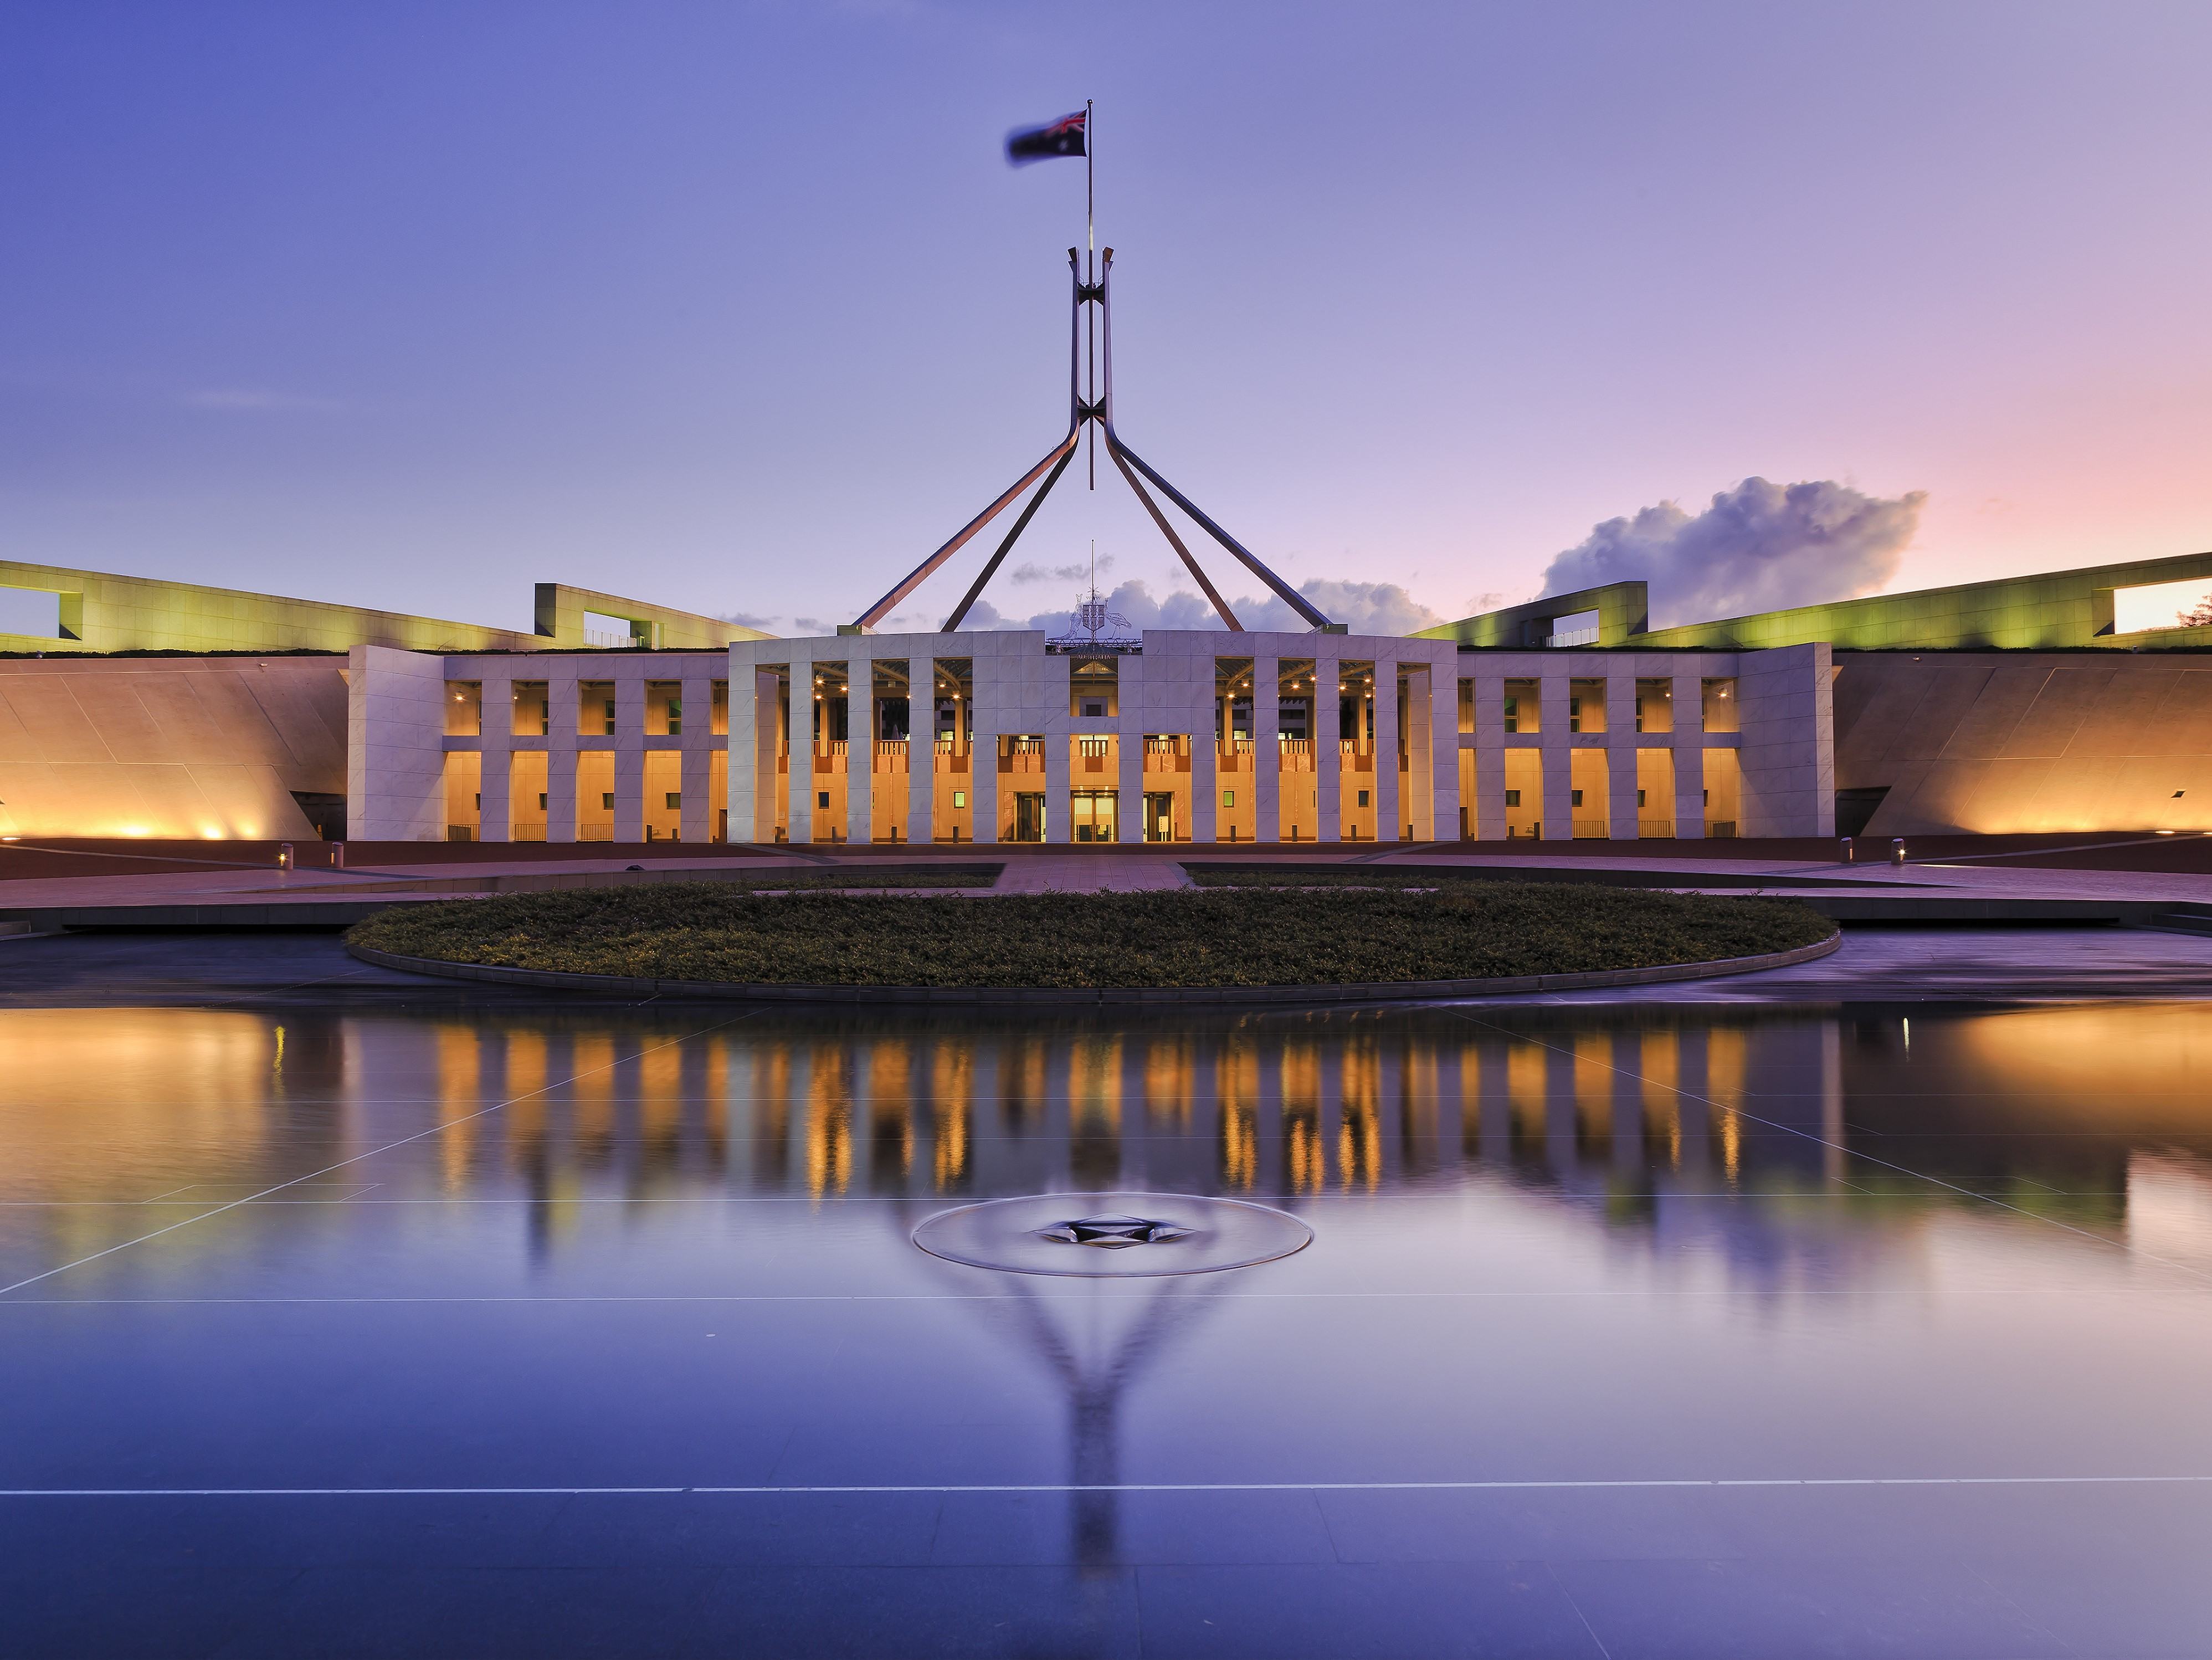 colourful reflection of Canberra's new parliament building in a fountain pond at sunset.